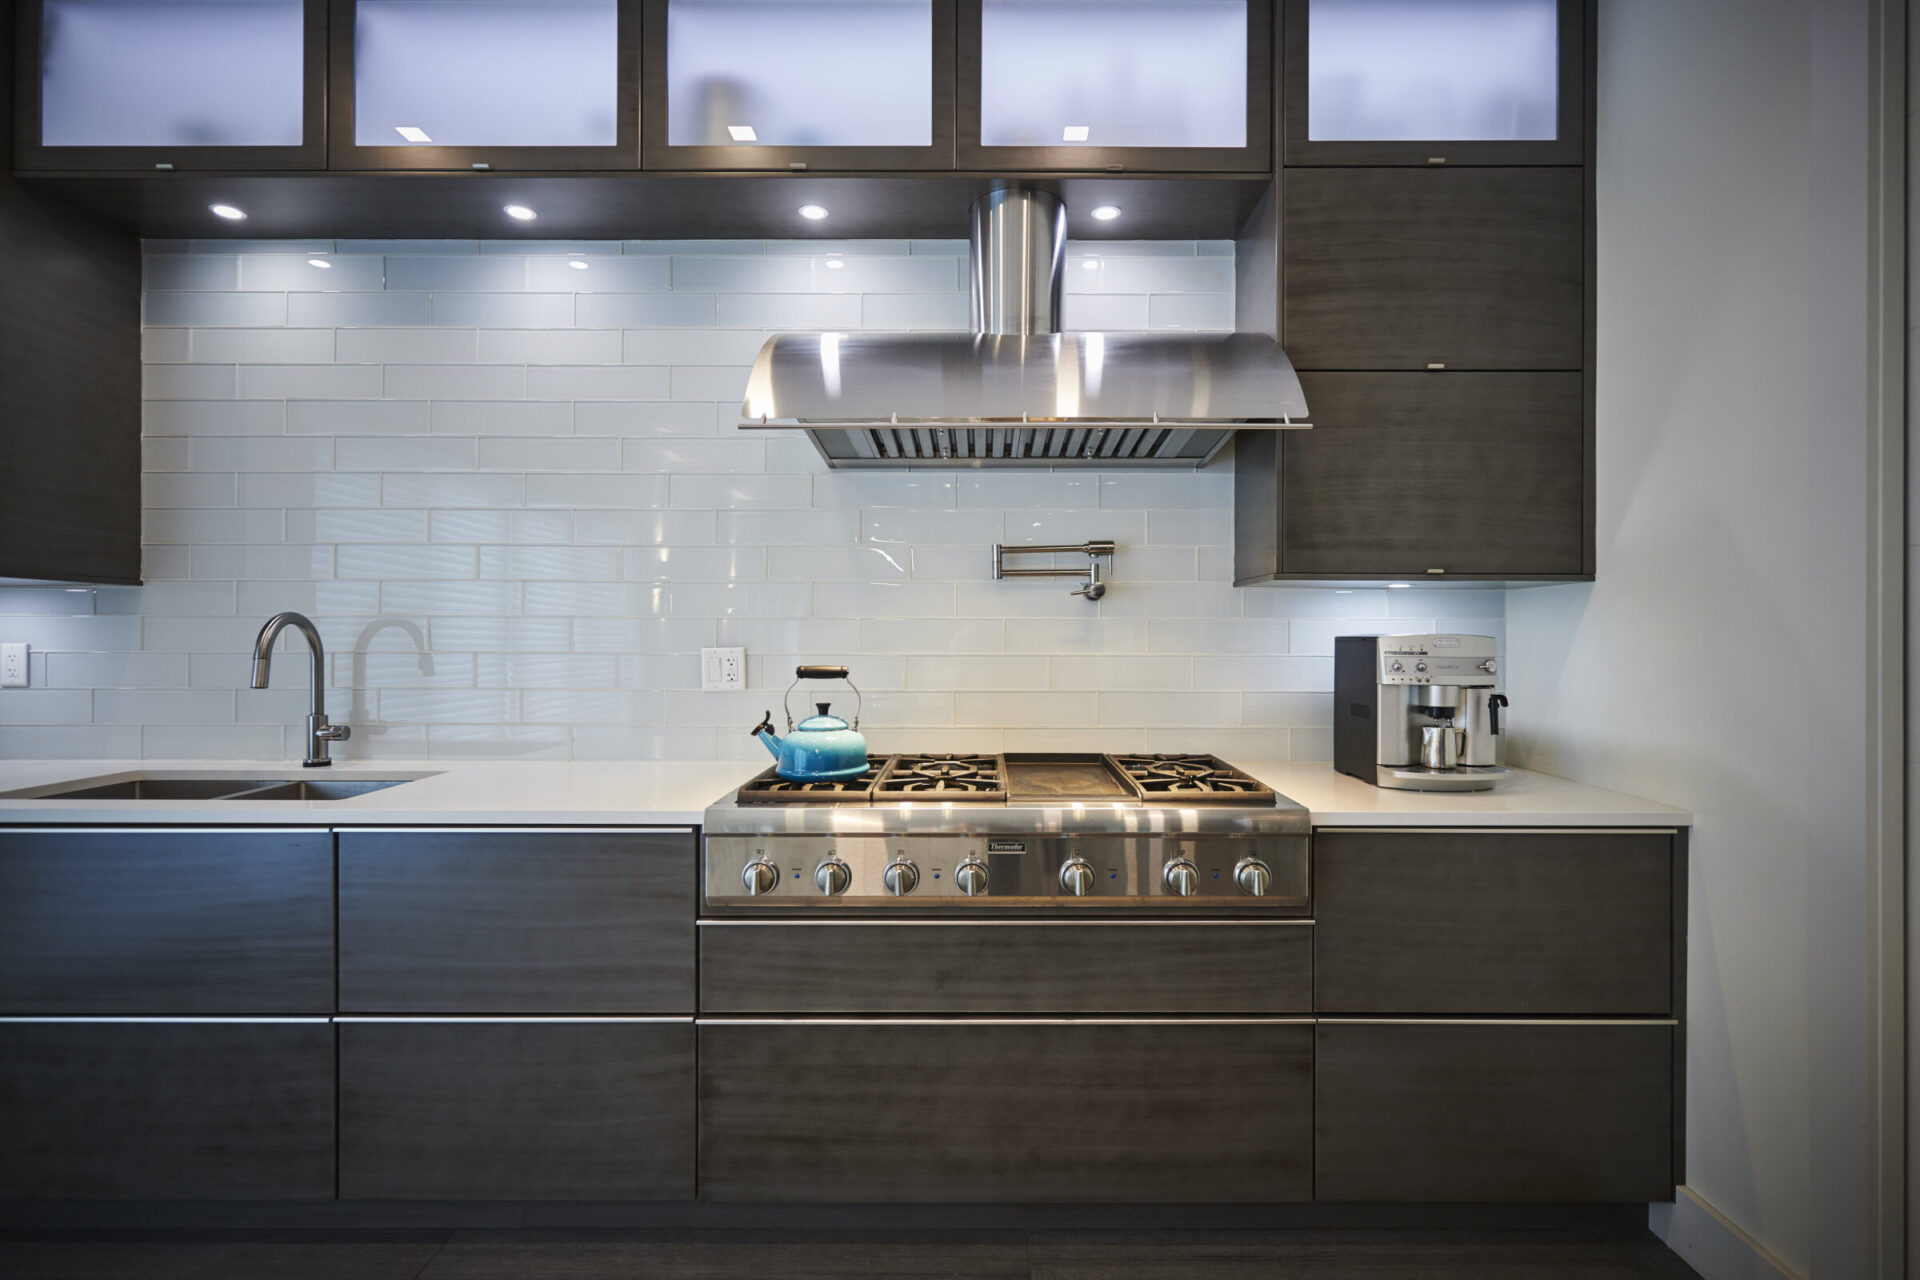 A modern kitchen featuring stainless steel appliances, dark cabinetry, a gas stove, and a teal kettle. White subway tile backsplash and under-cabinet lighting accent the space.